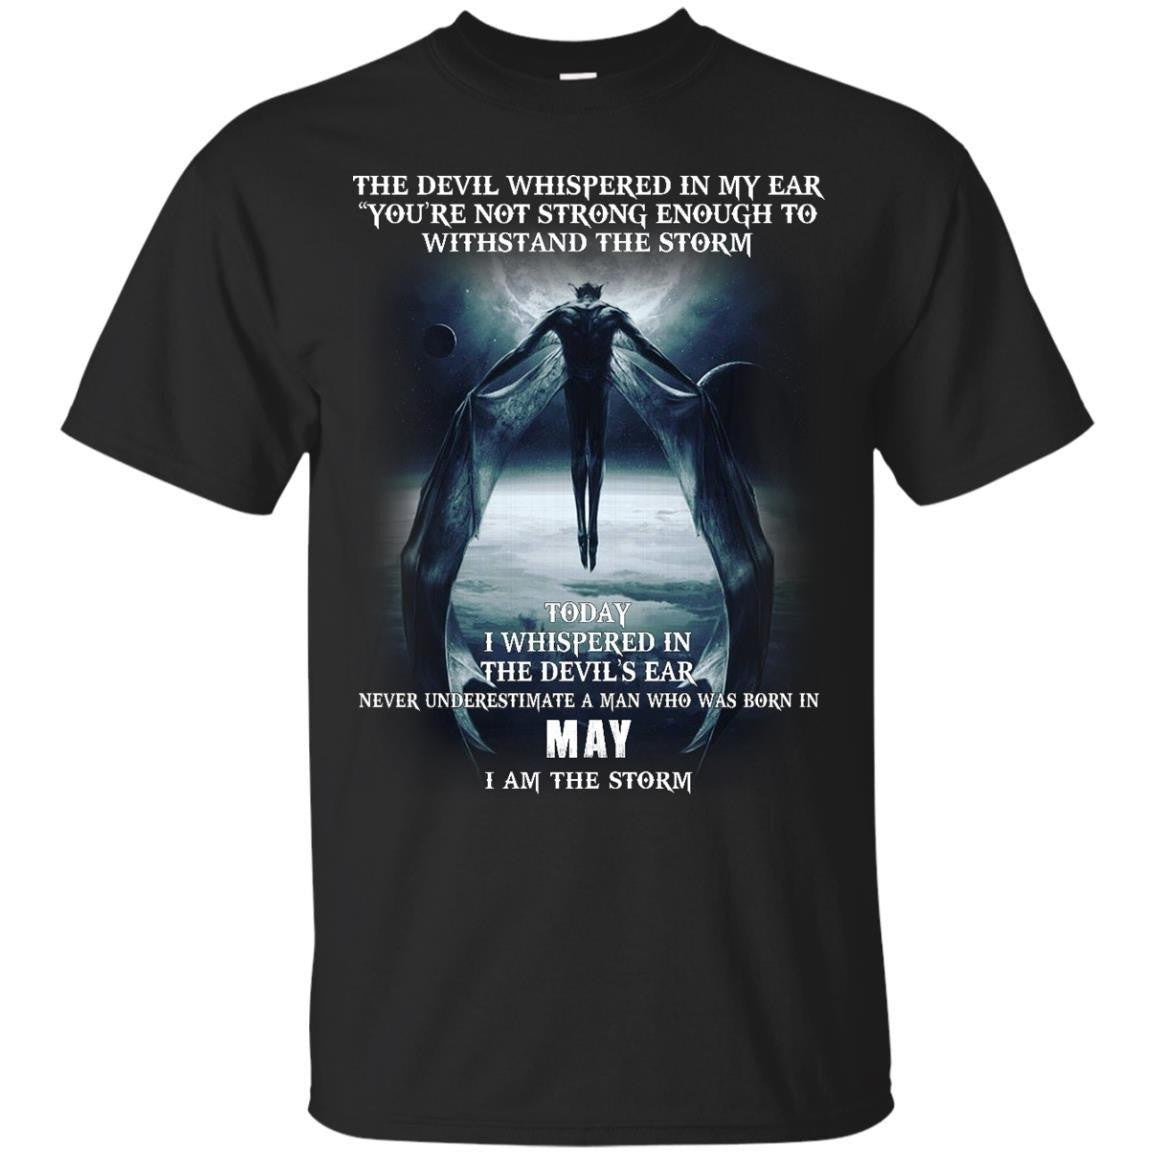 The Devil whispered in my ear, a Man born in May shirt, tank